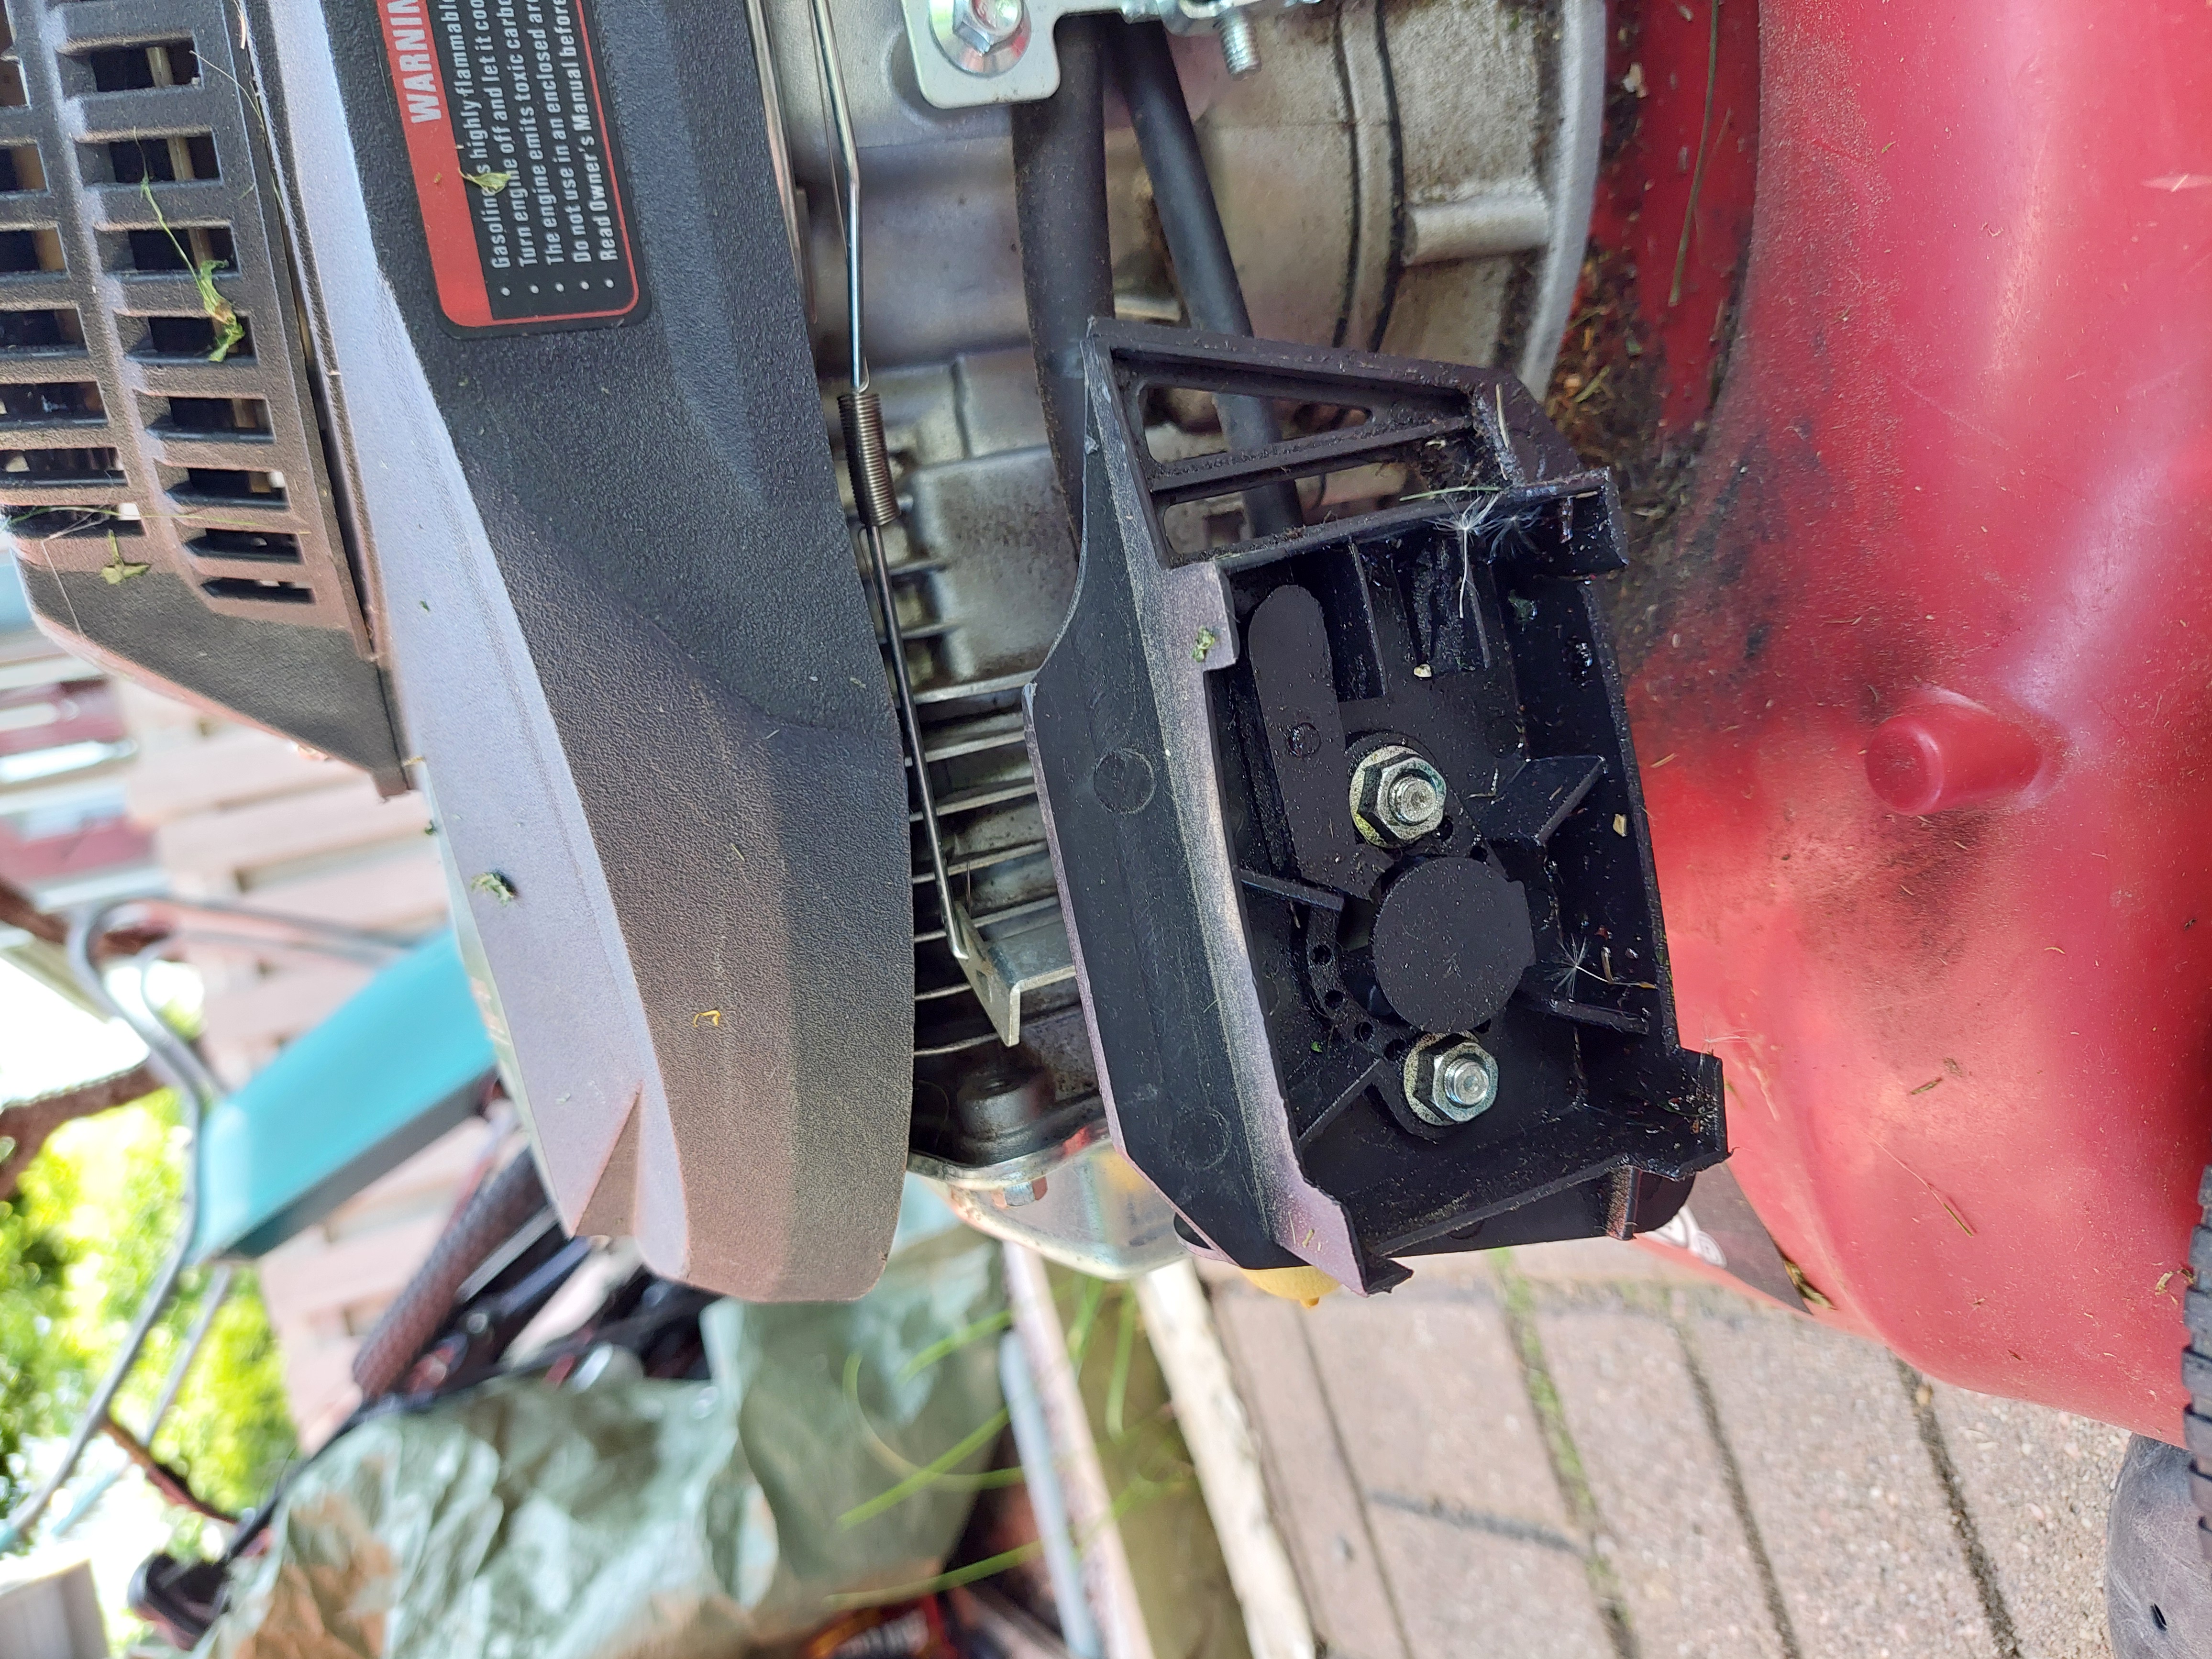 Hello
I have accidentally driven off the cover and air filter.  Meec Tools 721-215 Lawnmower
Where ...